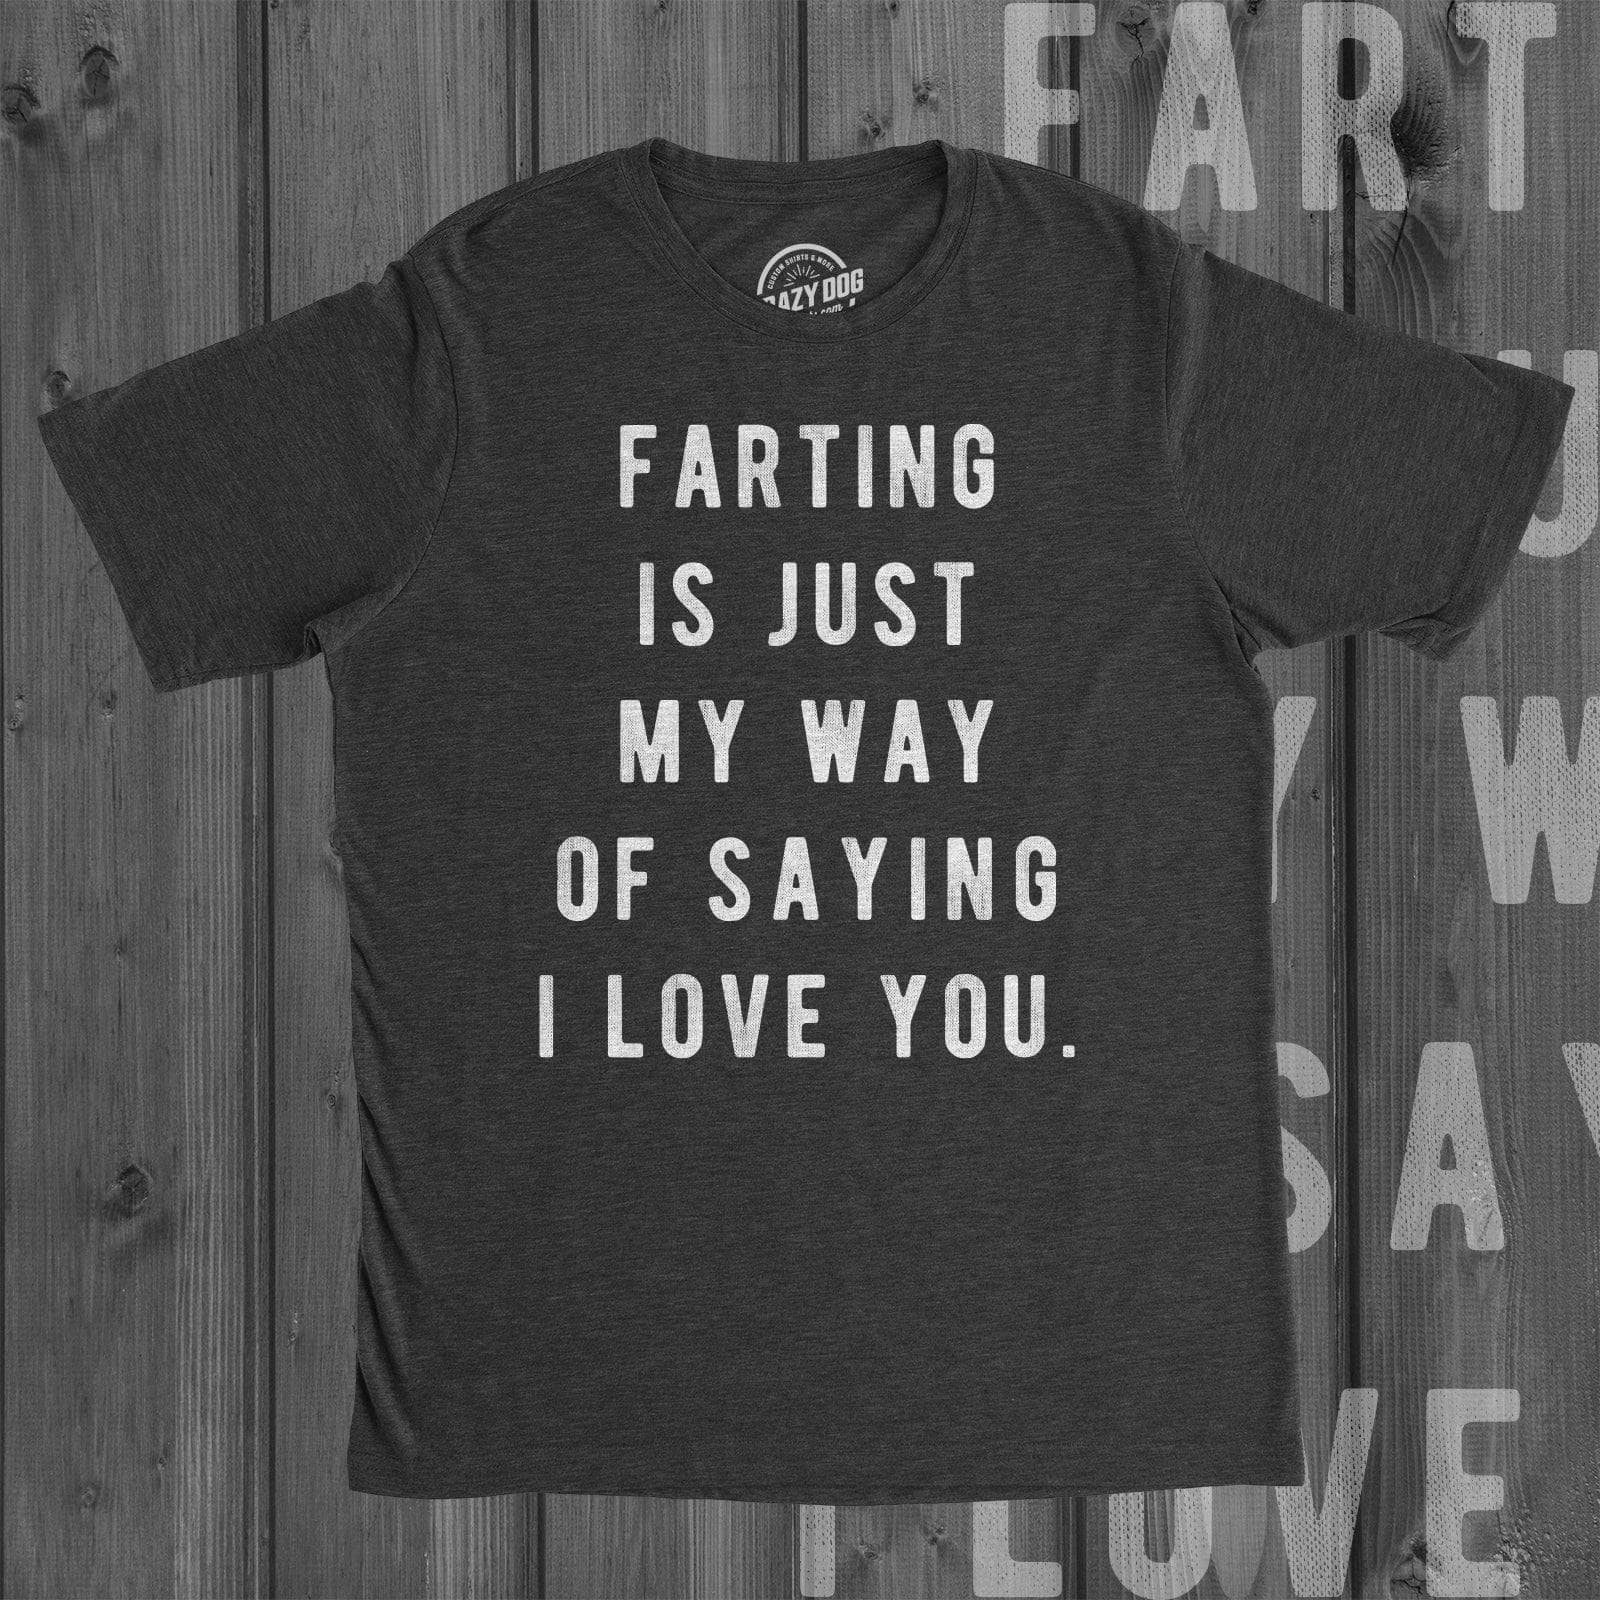 Farting Is Just My Way Of Saying I Love You Men's Tshirt  -  Crazy Dog T-Shirts